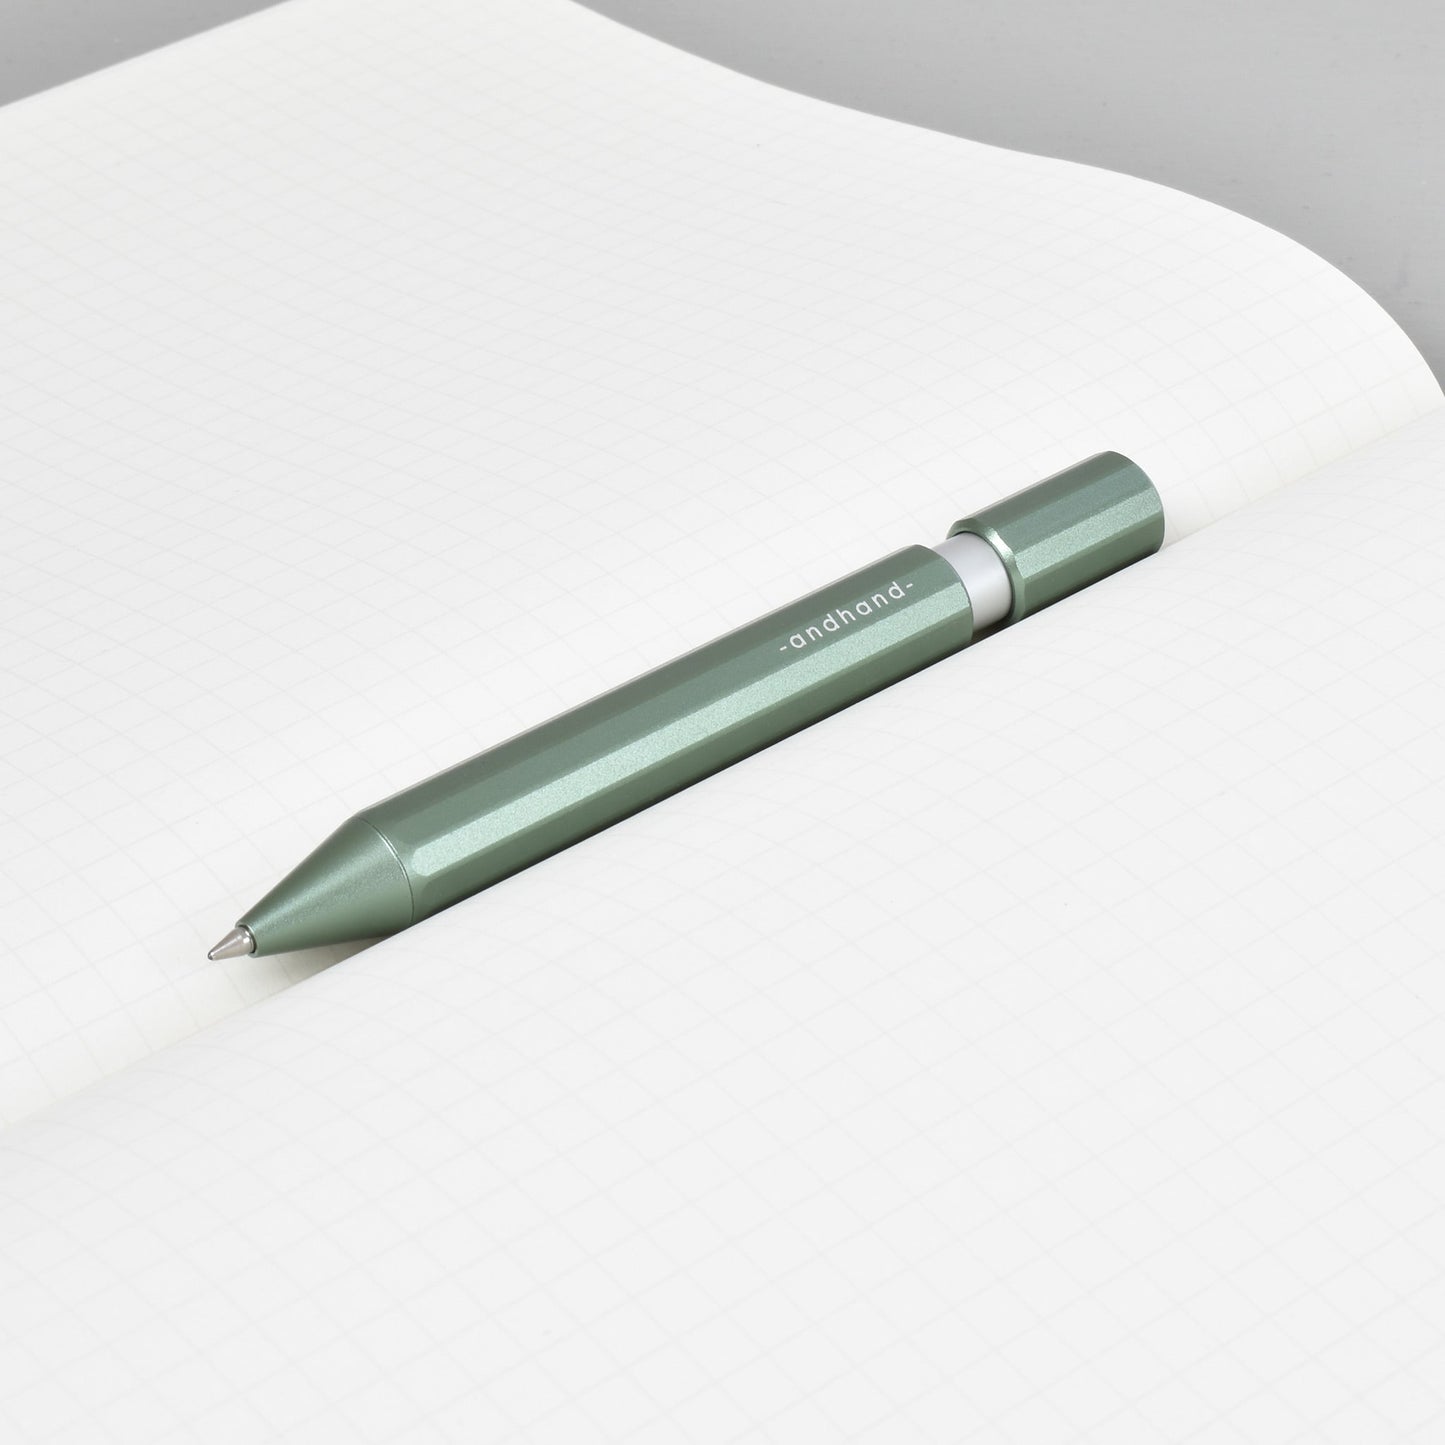 Aspect retractable pen in forest green anodized finish. A great pen for journaling, sketching or note taking. Equipped with a capless system rollerball cartridge for great ink flow.